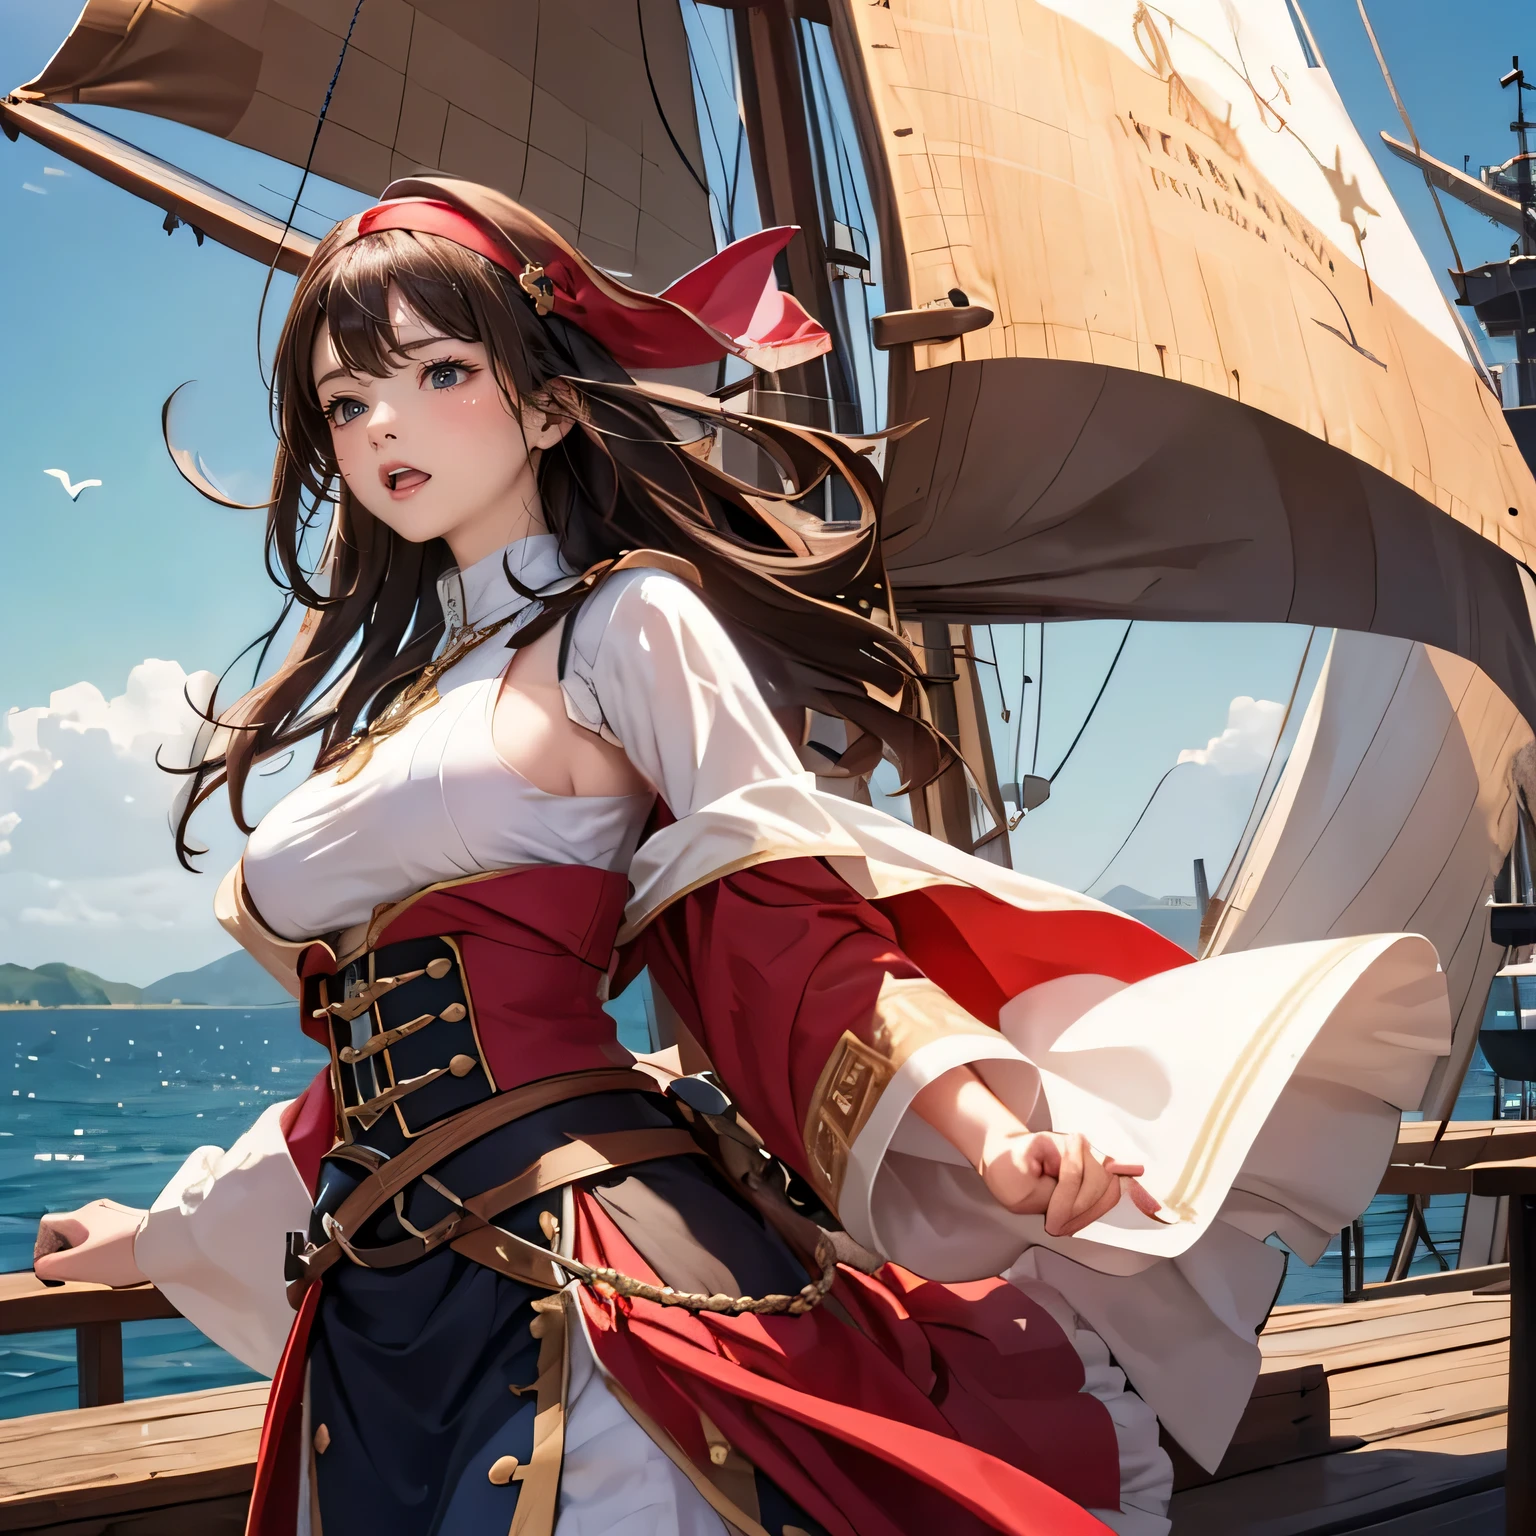 ((medieval world)), (noble's daughter who became a pirate, medieval European aristocratic dress, breasts), on the deck of a medieval large galleon that was made of woods during the Age of Discovery in the Middle Ages, windy, few sailors, a lot of cargo,